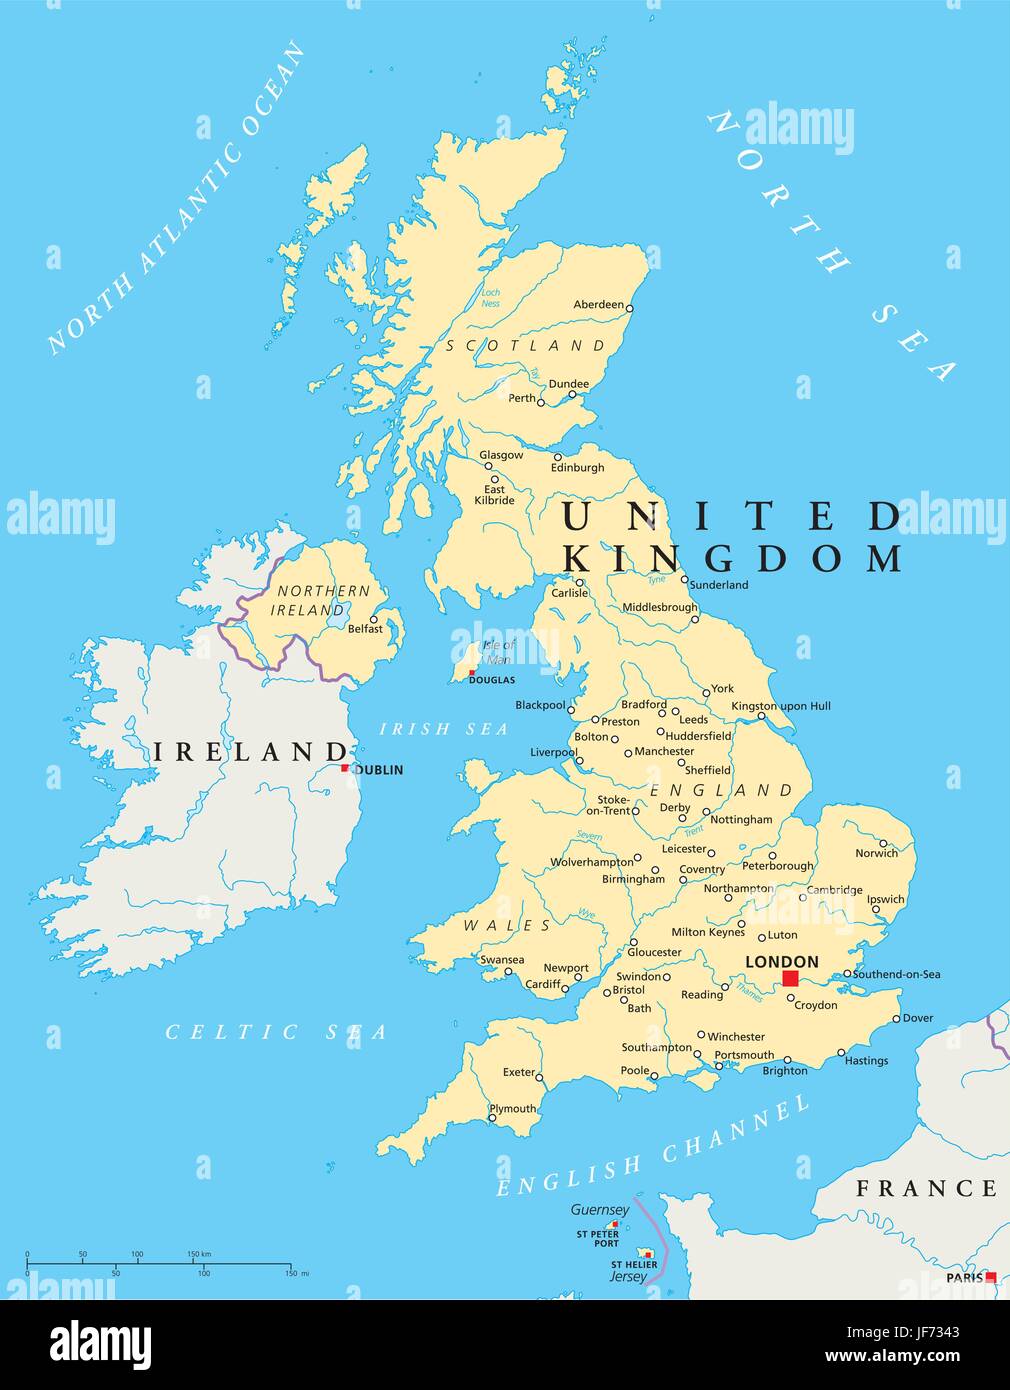 London On The World Map And England A Tagmap Me Where Is England